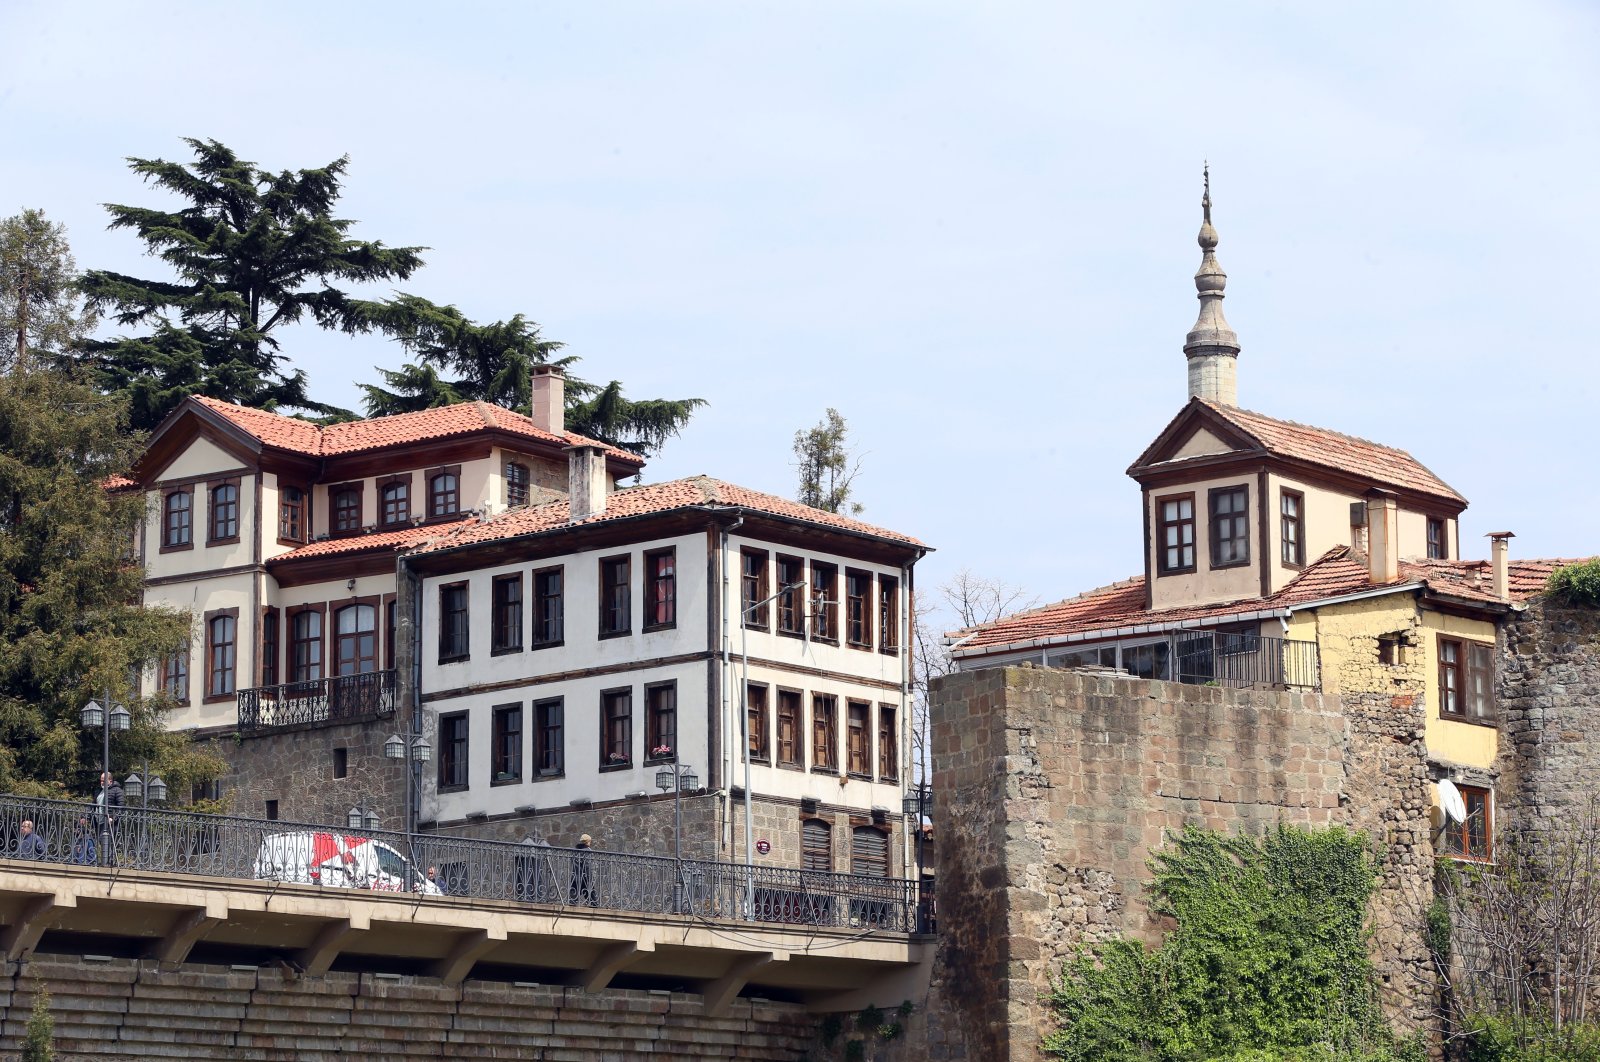 Ortahisar, the central district of Turkey&#039;s Trabzon, is on the cultural route of travelers and photographers in all seasons with its historical texture. The district draws attention with its Ottoman-era houses, mansions, bridges, inns and baths, Trabzon, Turkey, April 28, 2022. (AA Photo)